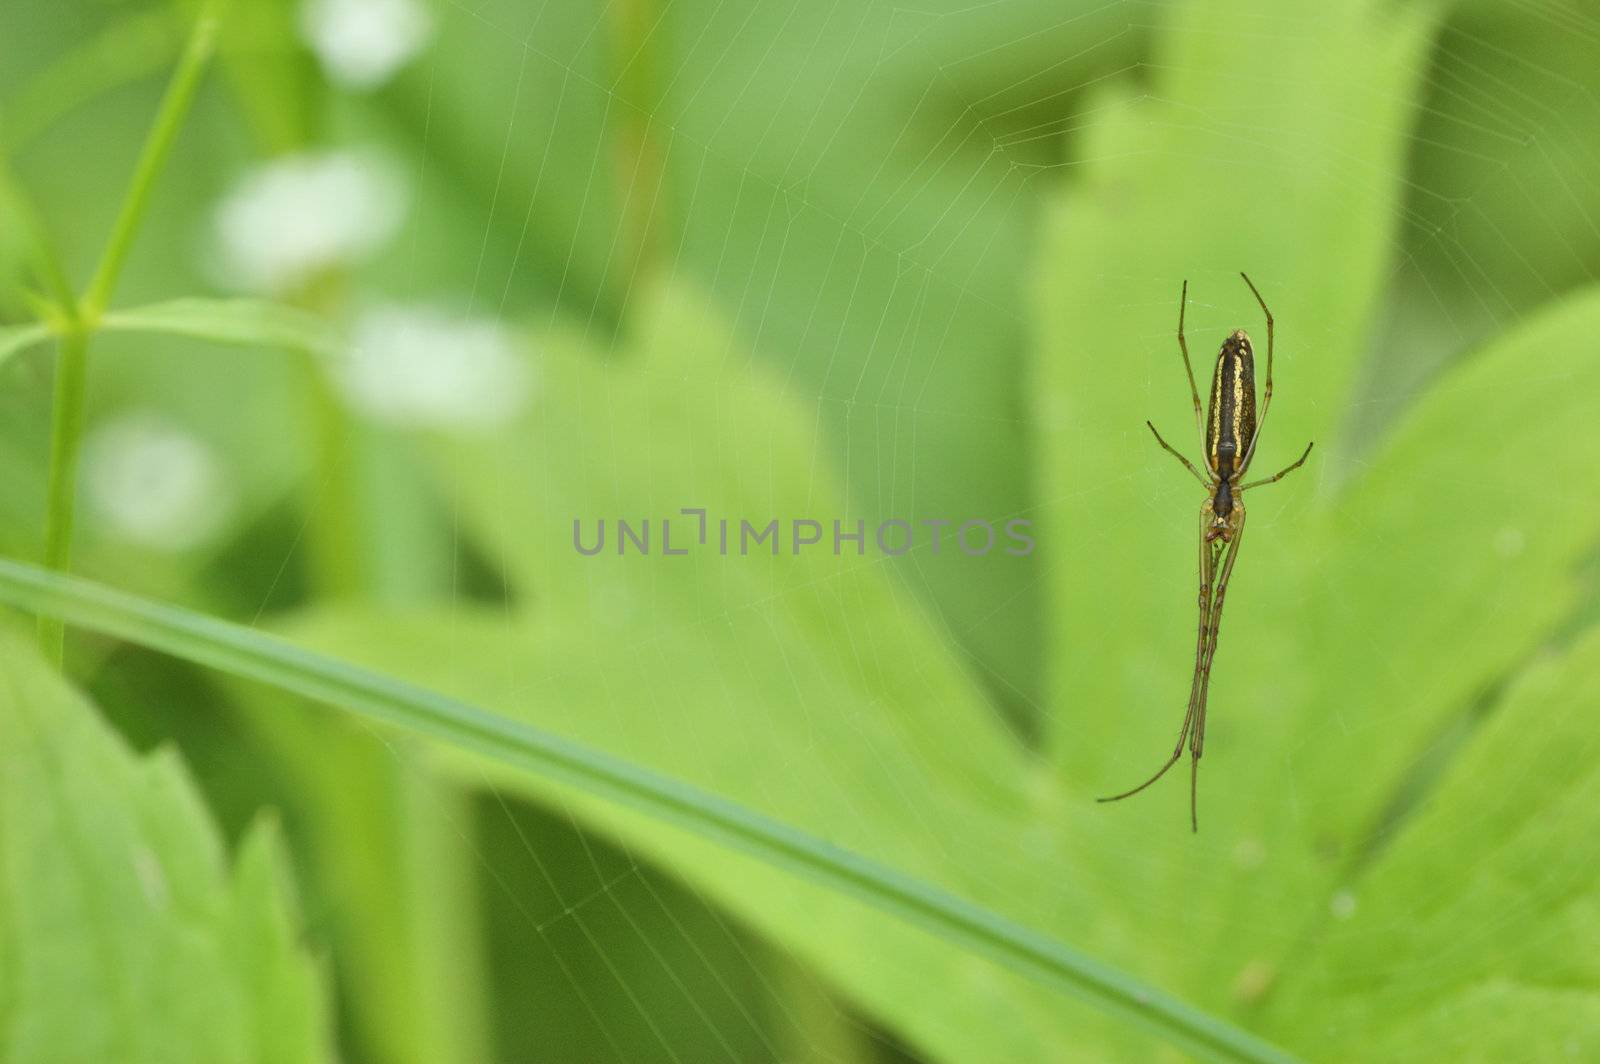 Long-jawed Orb Weaver (Tetragnatha laboriosa) by brm1949